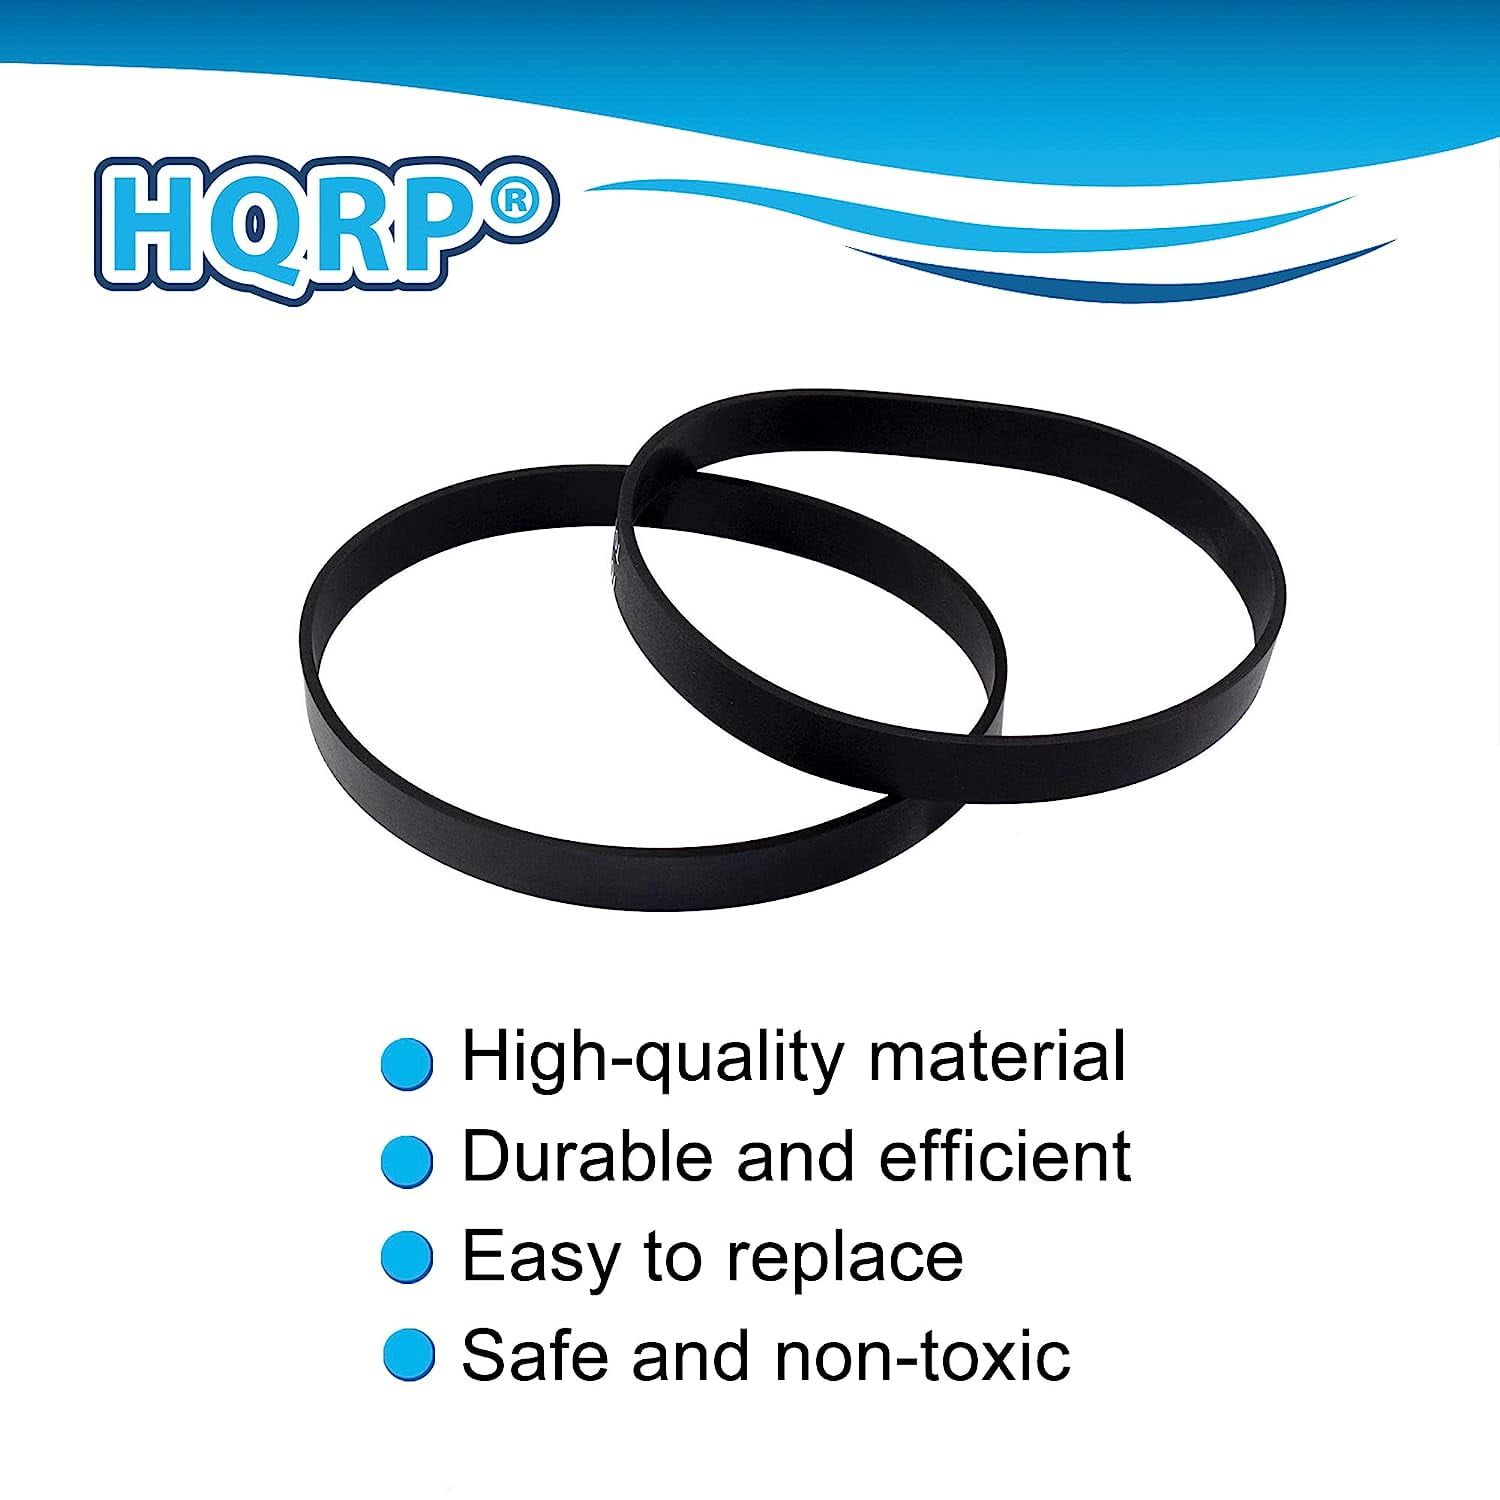 HQRP 2-pack Vacuum Belt for Dirt Devil Dynamite Extreme Vibe Easy Lite  Quick Vac Upright Vacuum models, compare to Dirt Devil STYLE 15 parts  3SN0220001 1SN0220001 